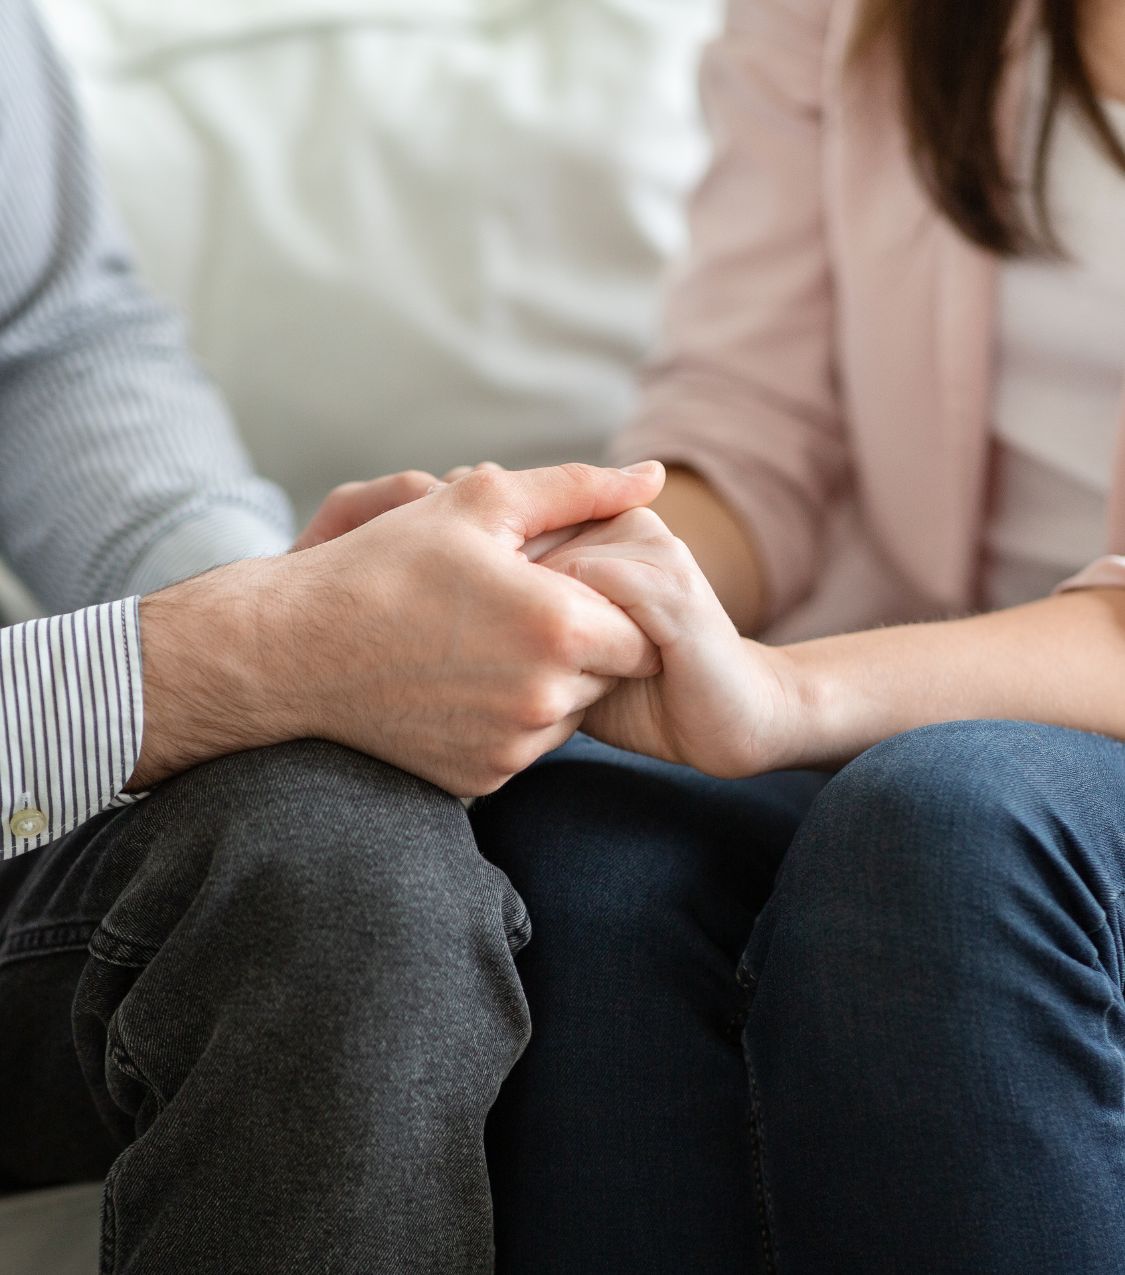 Couple holding hands - Learn how to regain trust after cheating with our relationship experts guidance. Schedule a consultation to rebuild trust. Serving couples in California, North Carolina, Illinois, Florida, Colorado, Virginia, New York in the United States, Canada, and globally.